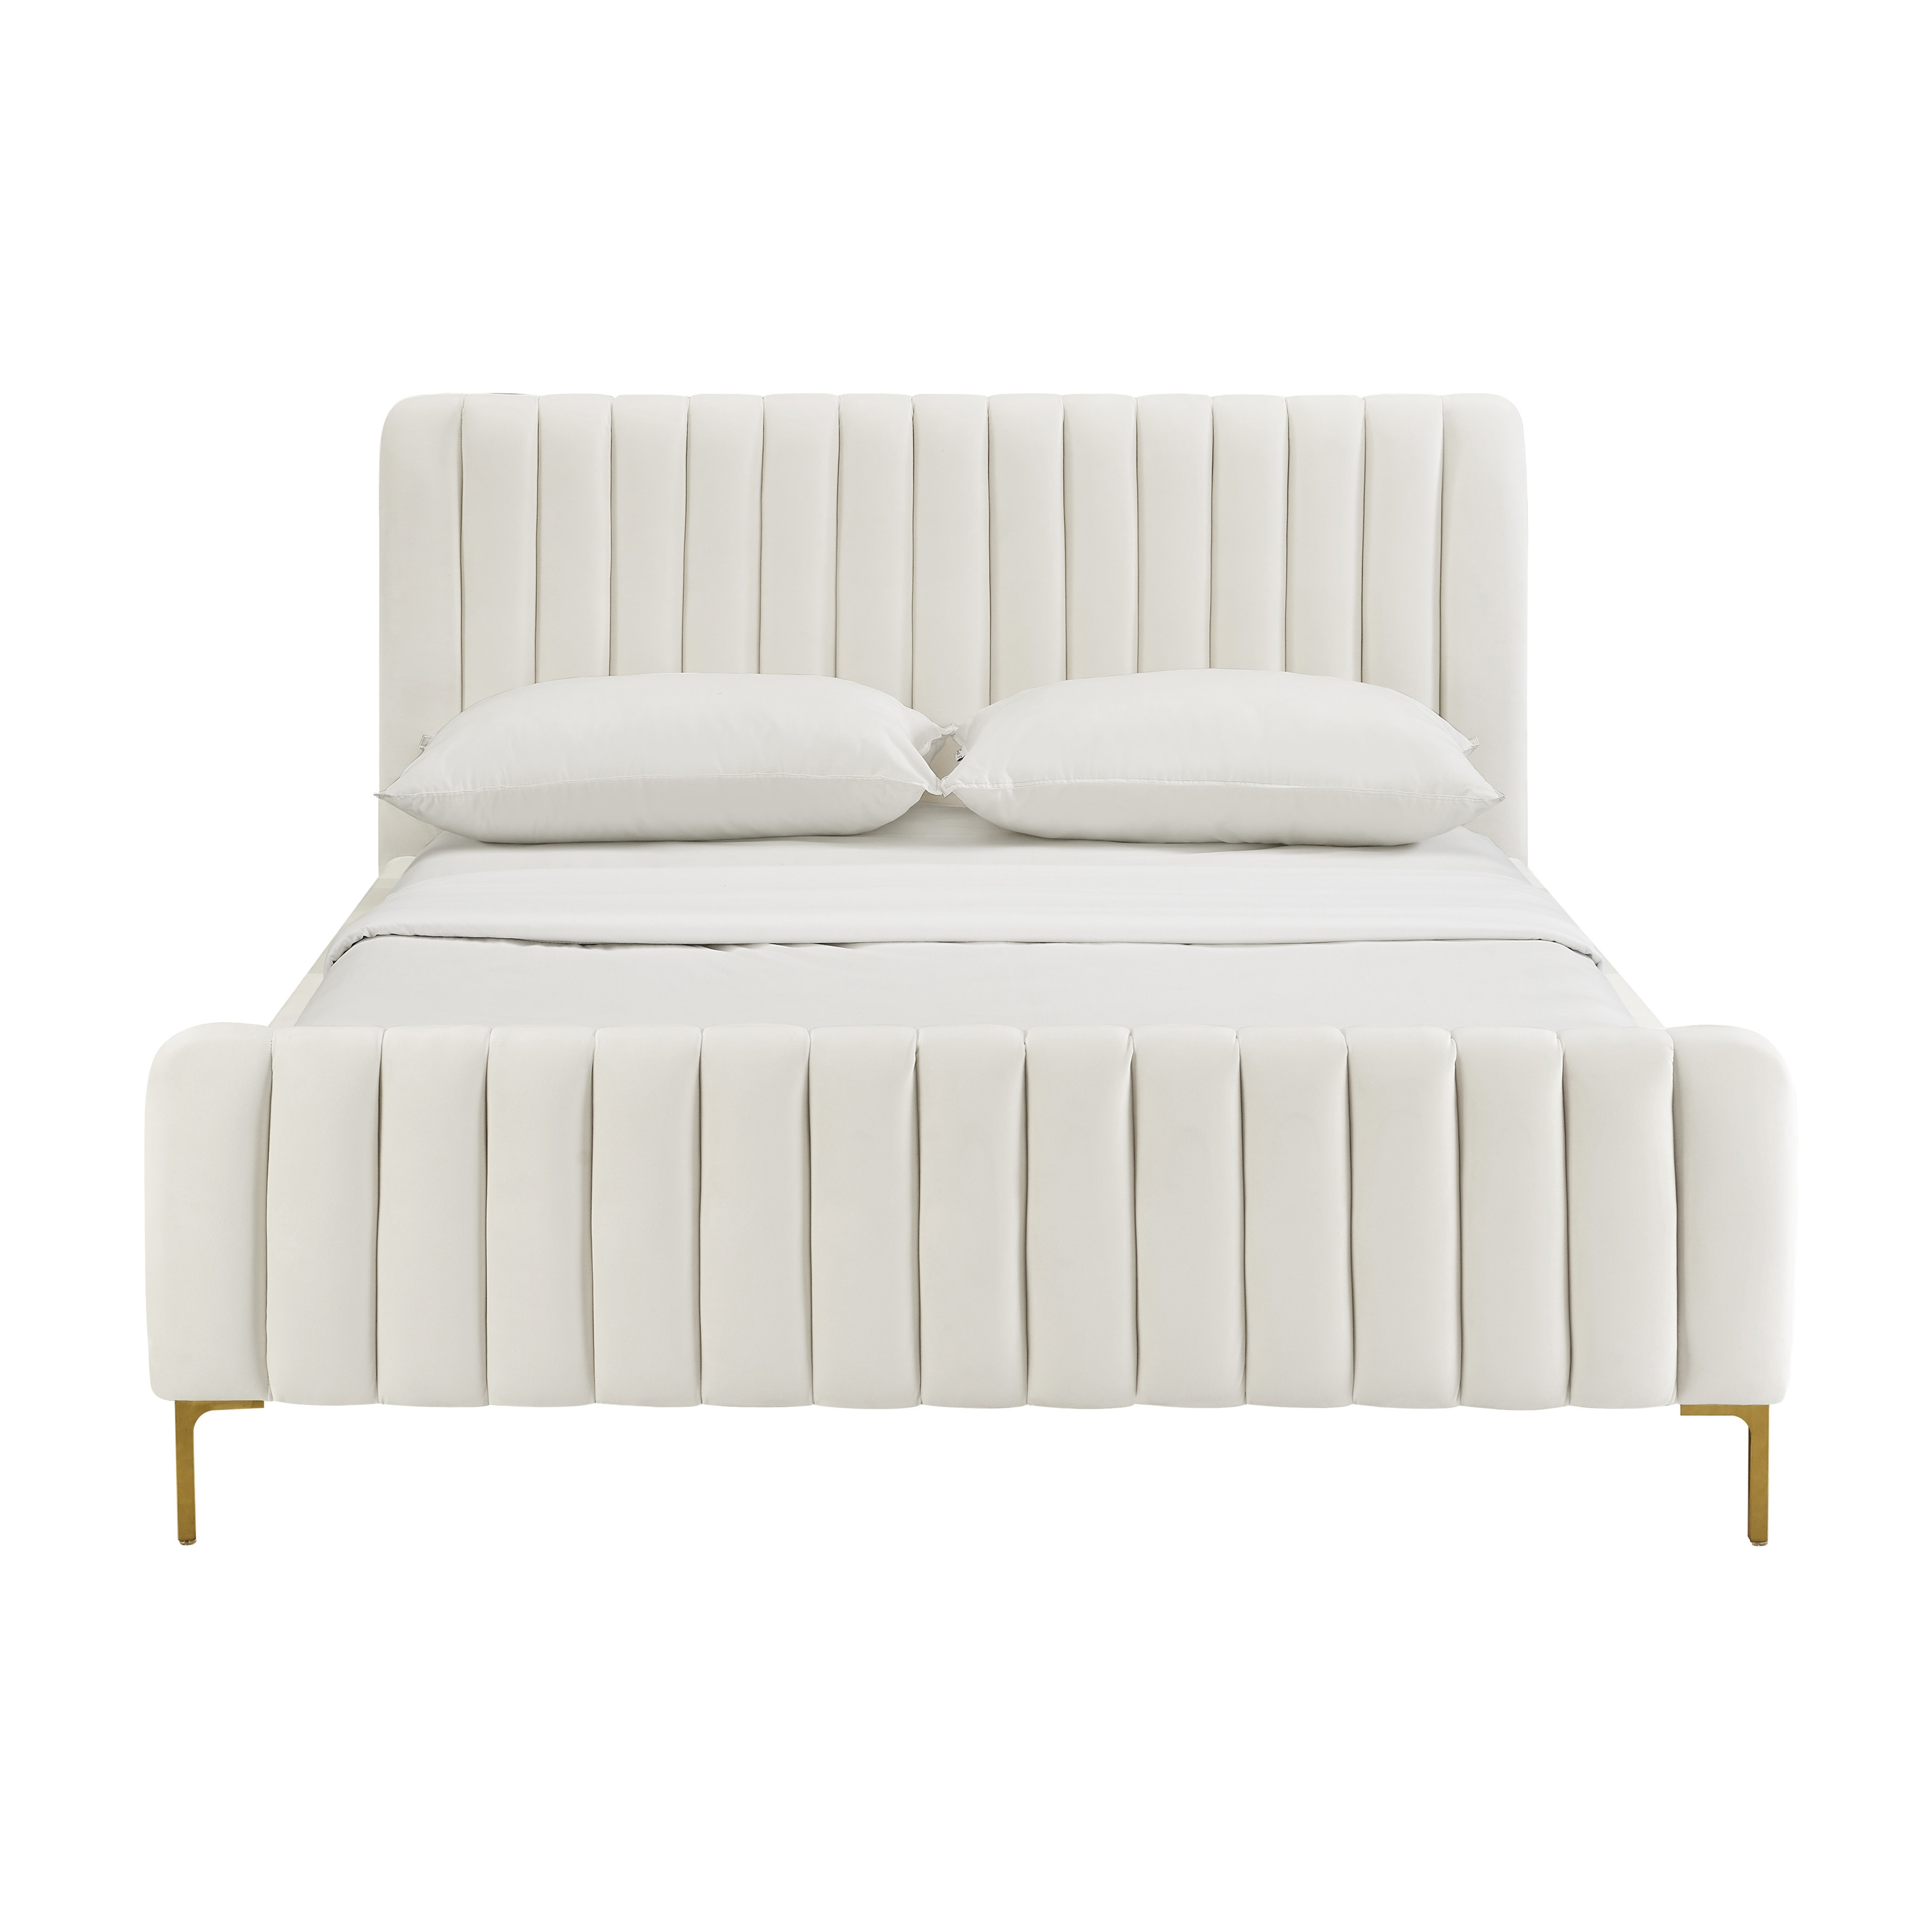 Angela Cream Bed in King - Image 2